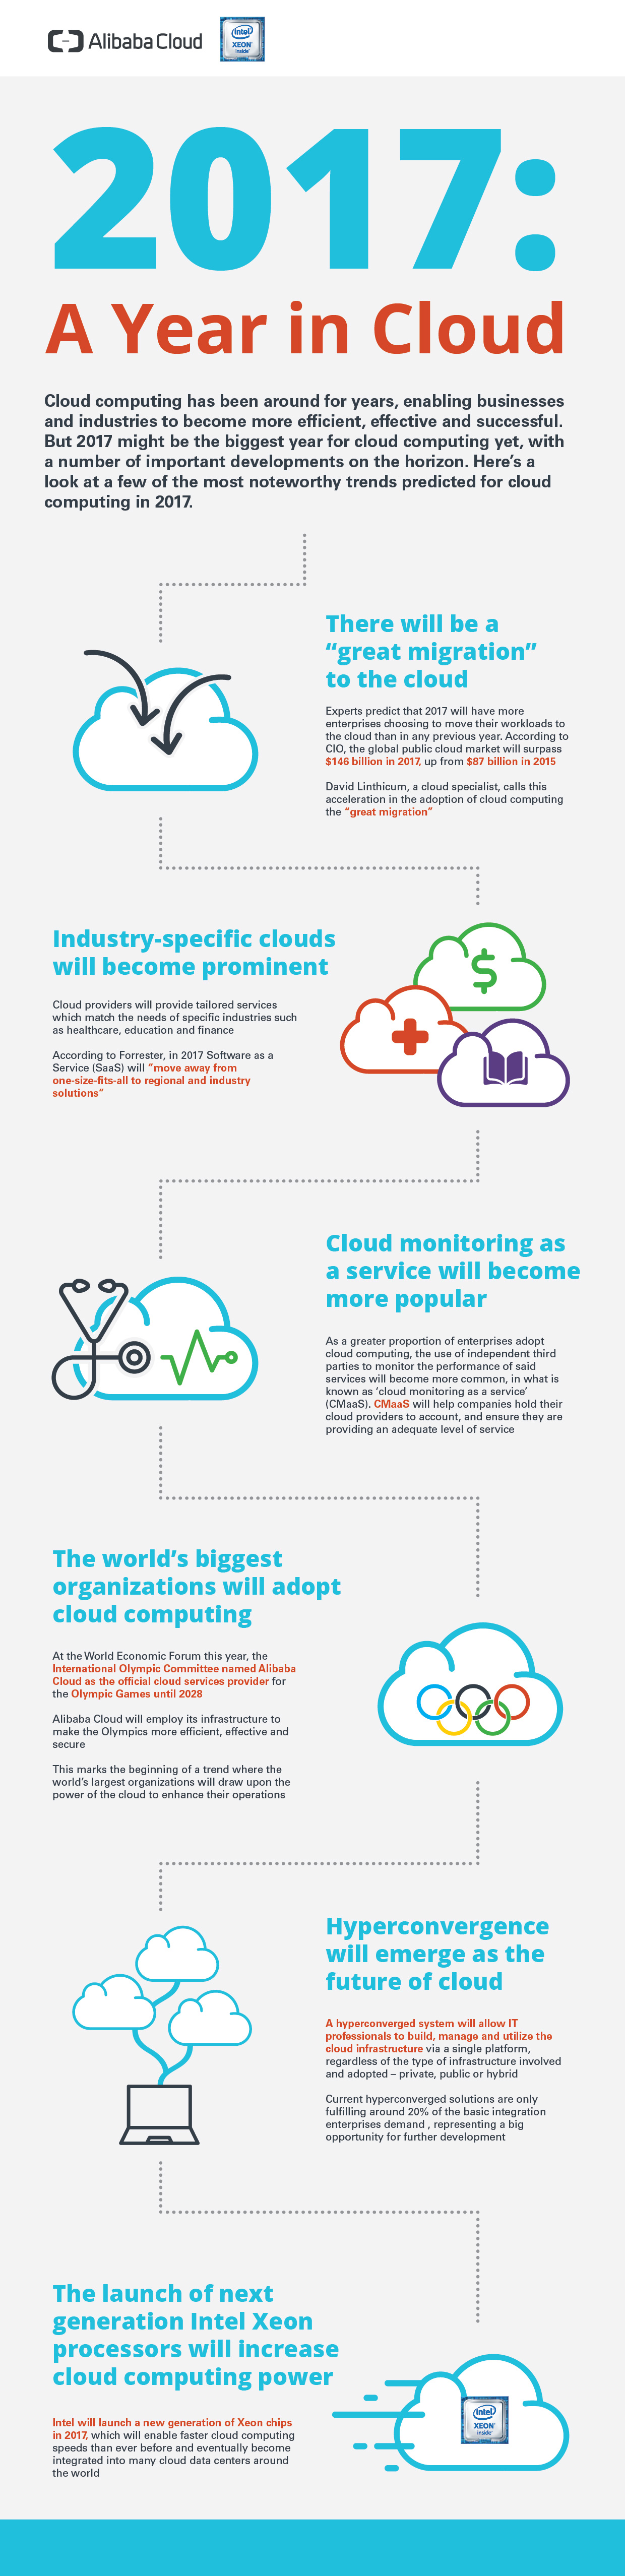 170314_Alibaba_A_Year_in_Cloud_Infographics_final